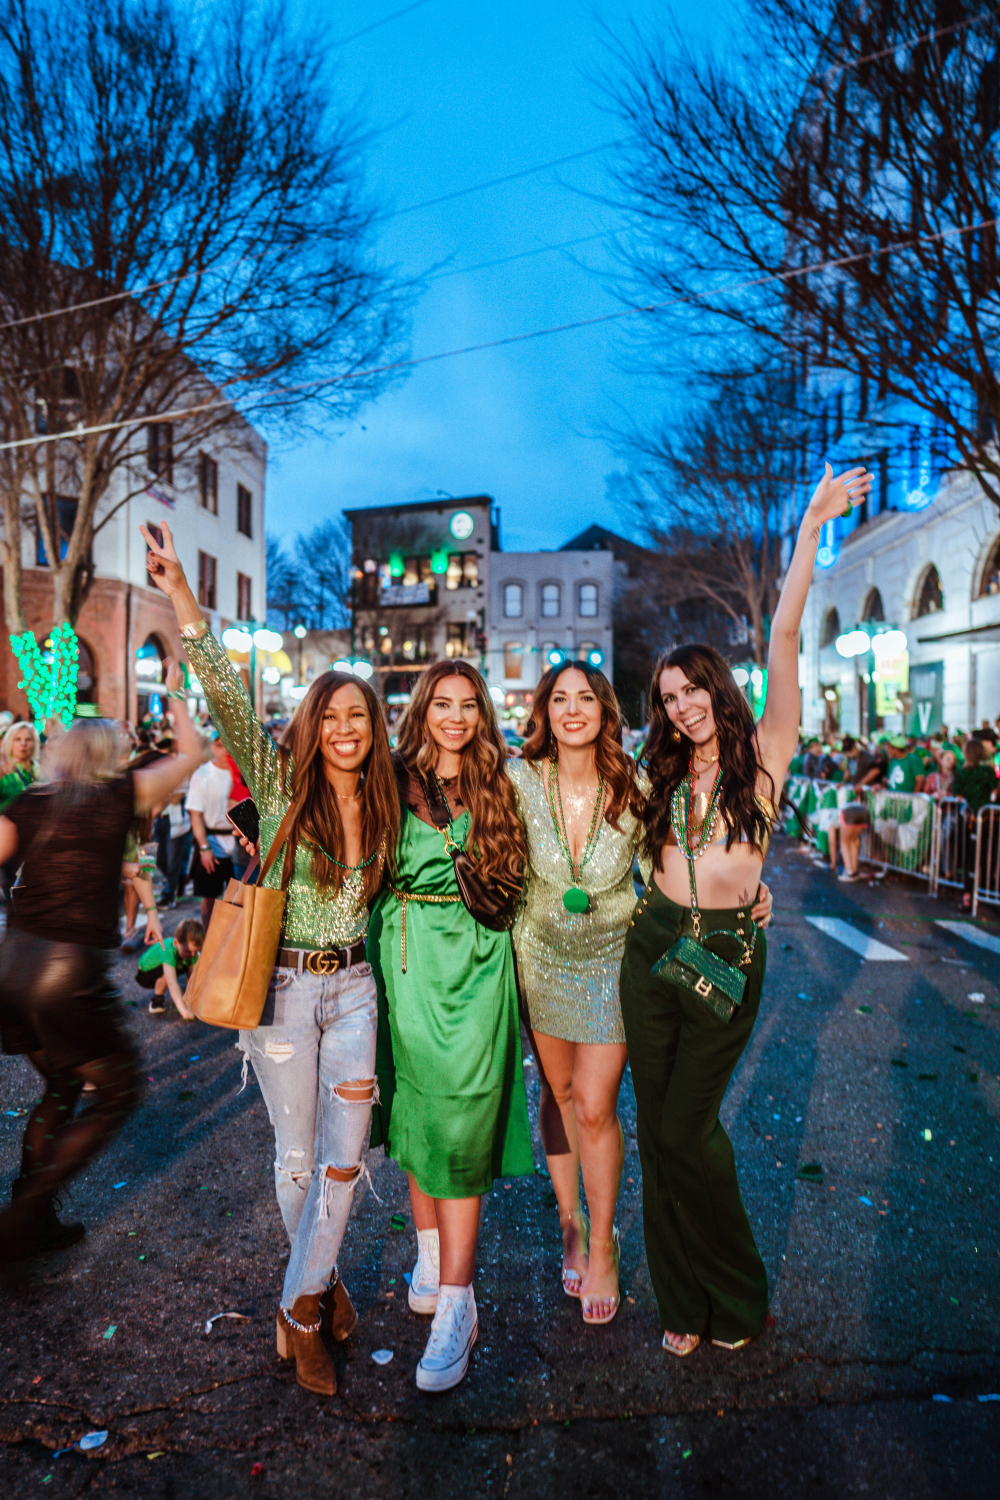 Babes That Wander (Iesha Vincent, Lauryn Hock, Jessica Moore, and Greta Hollar) stand next to each other posing on the stree where The World's SHortest St. Patricks Day PArade takes pace in Hot Springs Arkansas